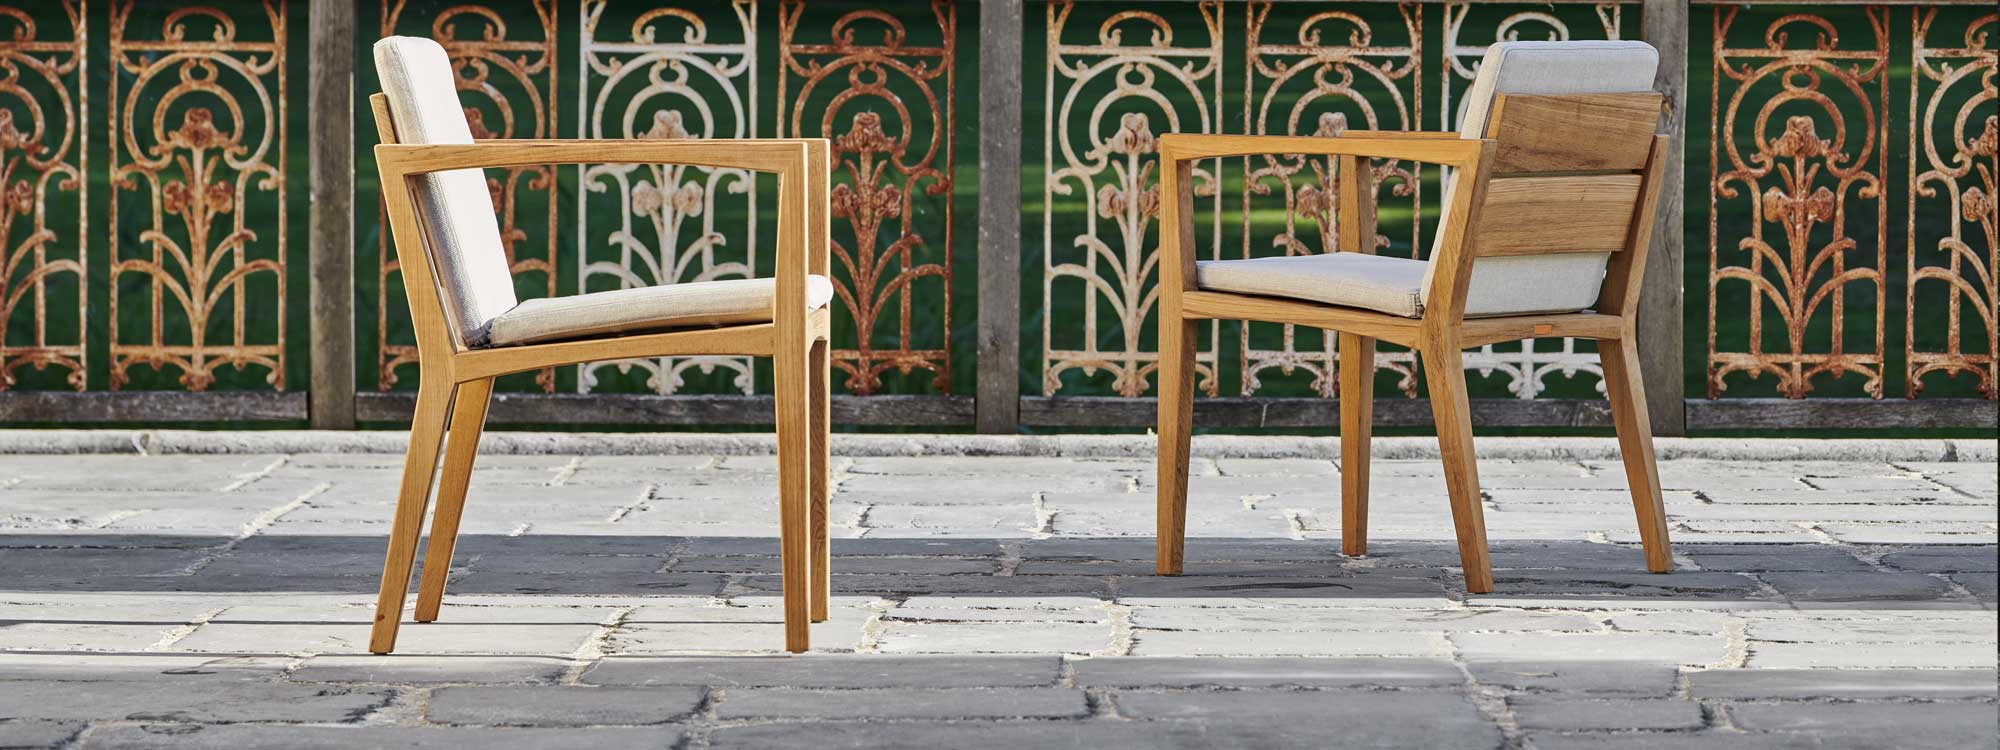 Image of pair of Zenhit teak dining chairs by Royal Botania on terrace in front of rusted steel railings